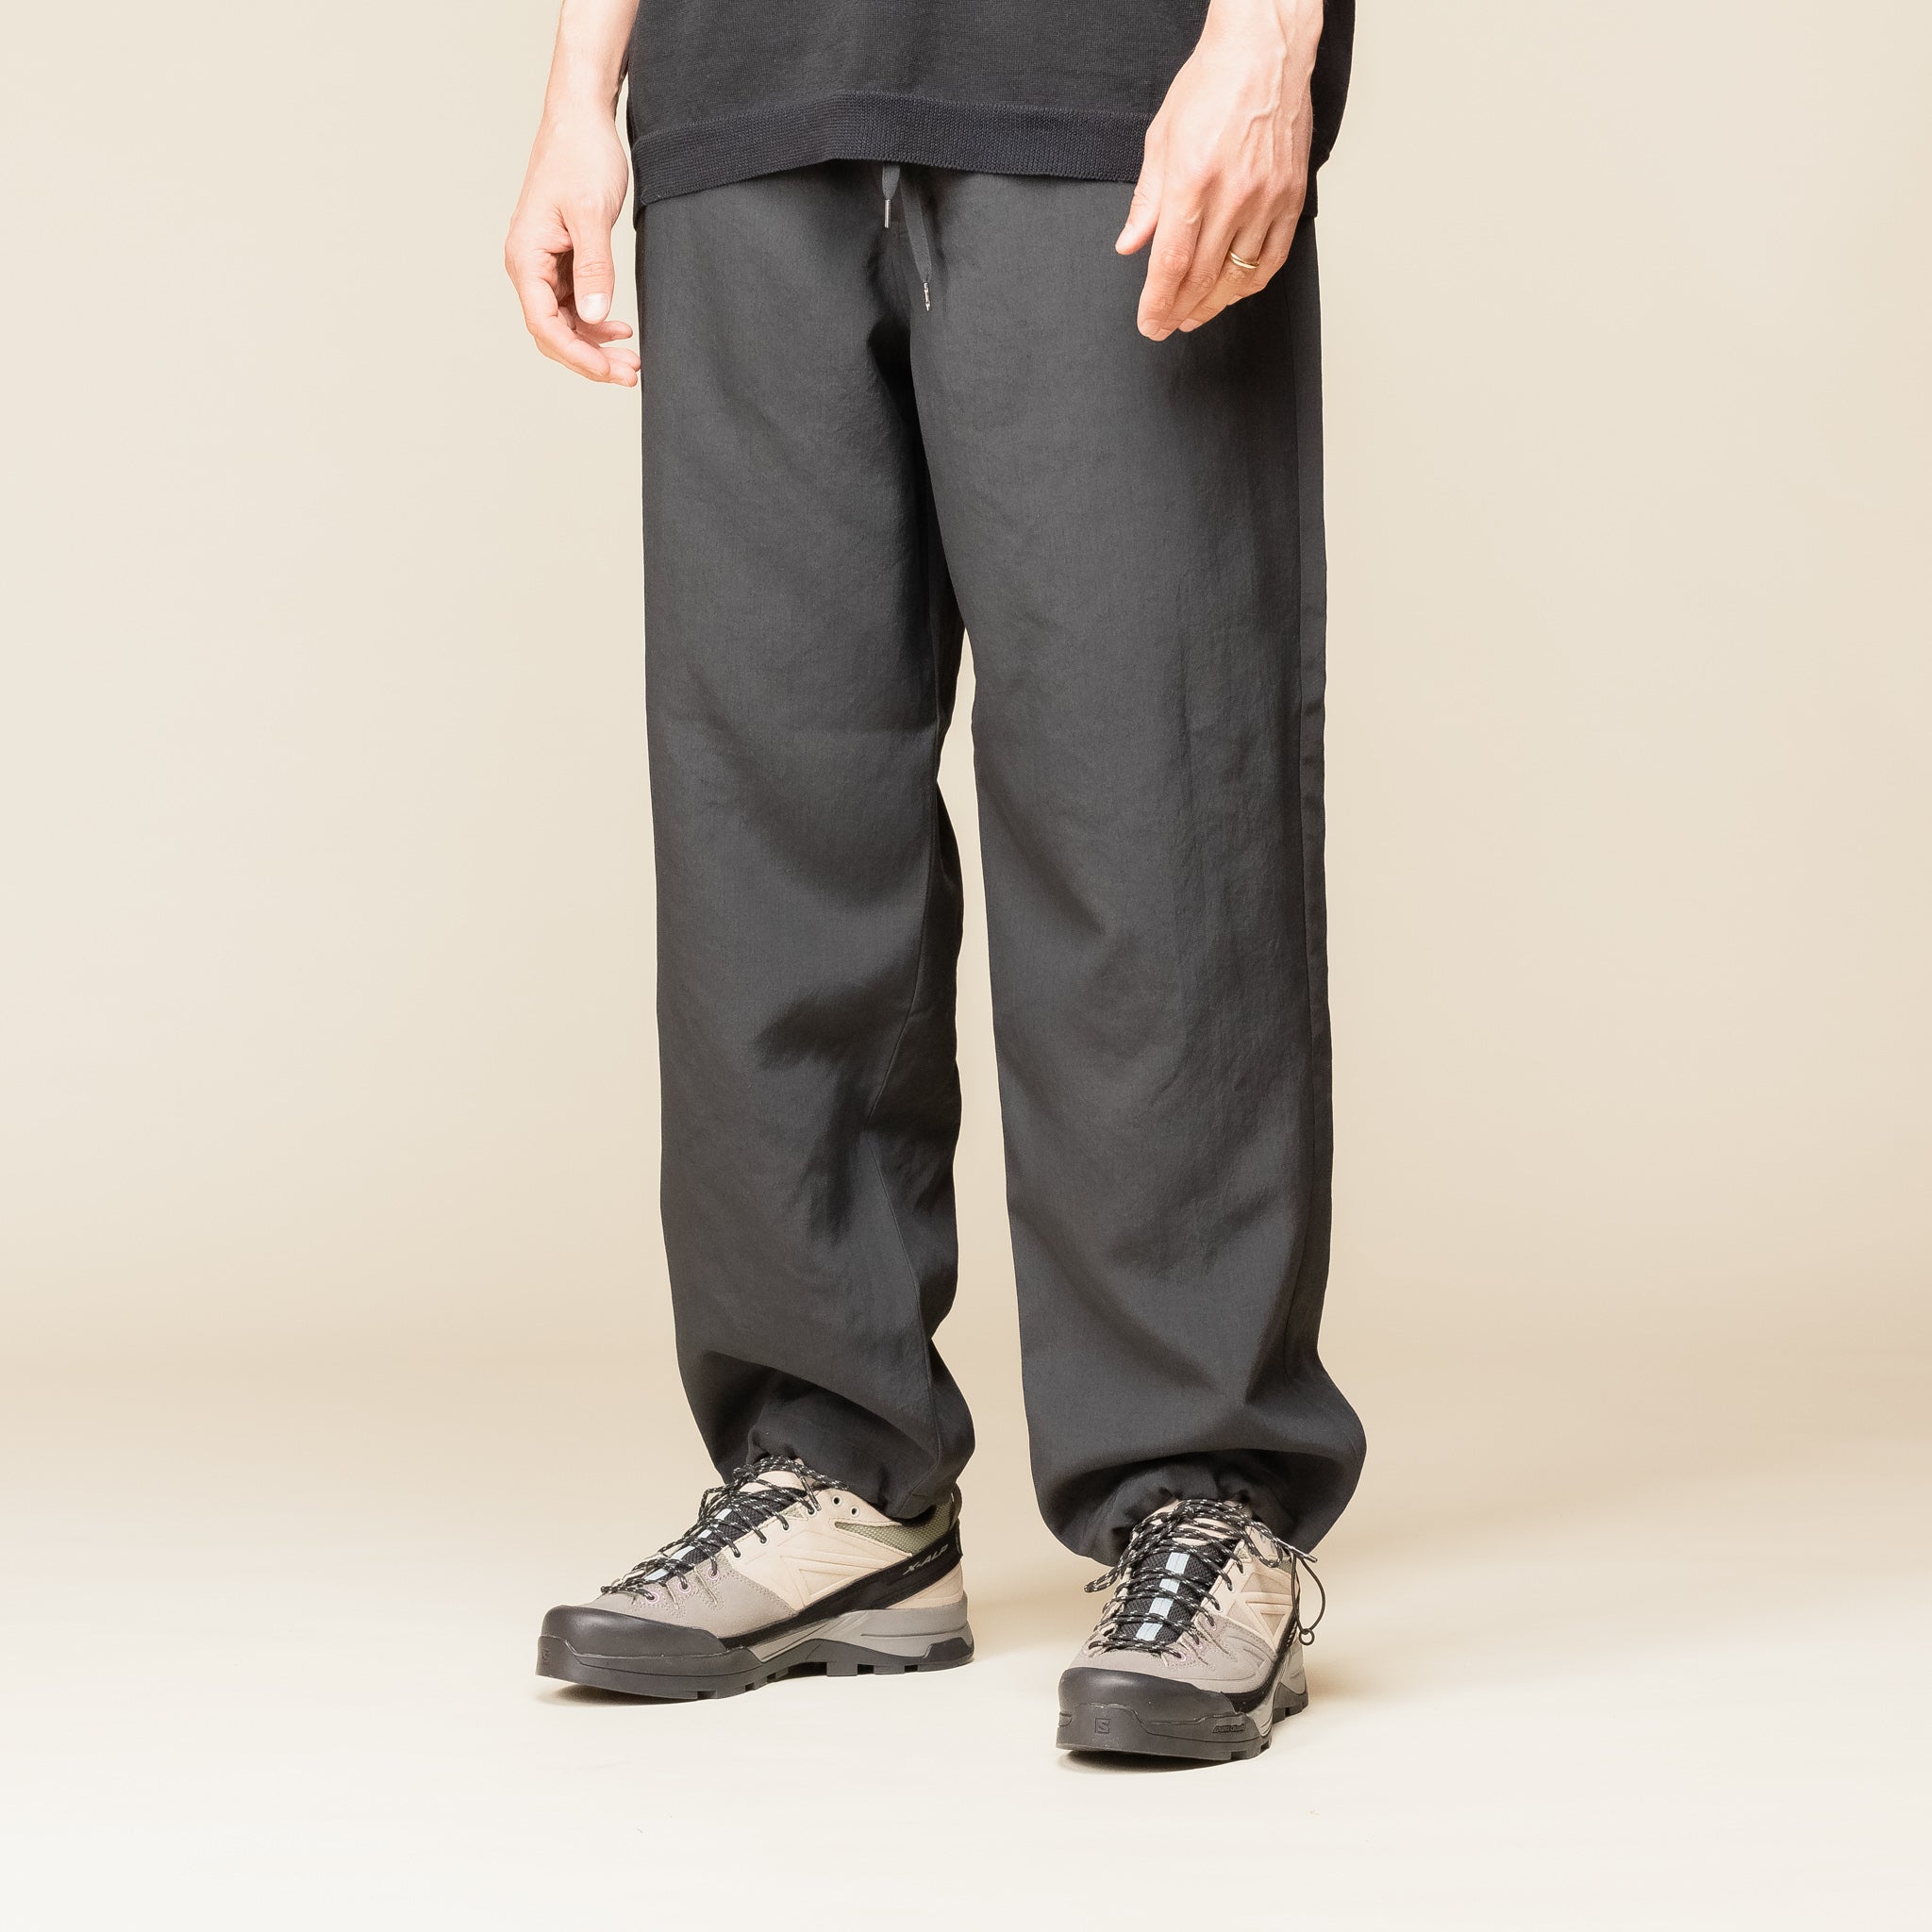 PT05241OS Still by Hand - Free Adjusting Easy Pants - Ink Black "still by hand stockists"